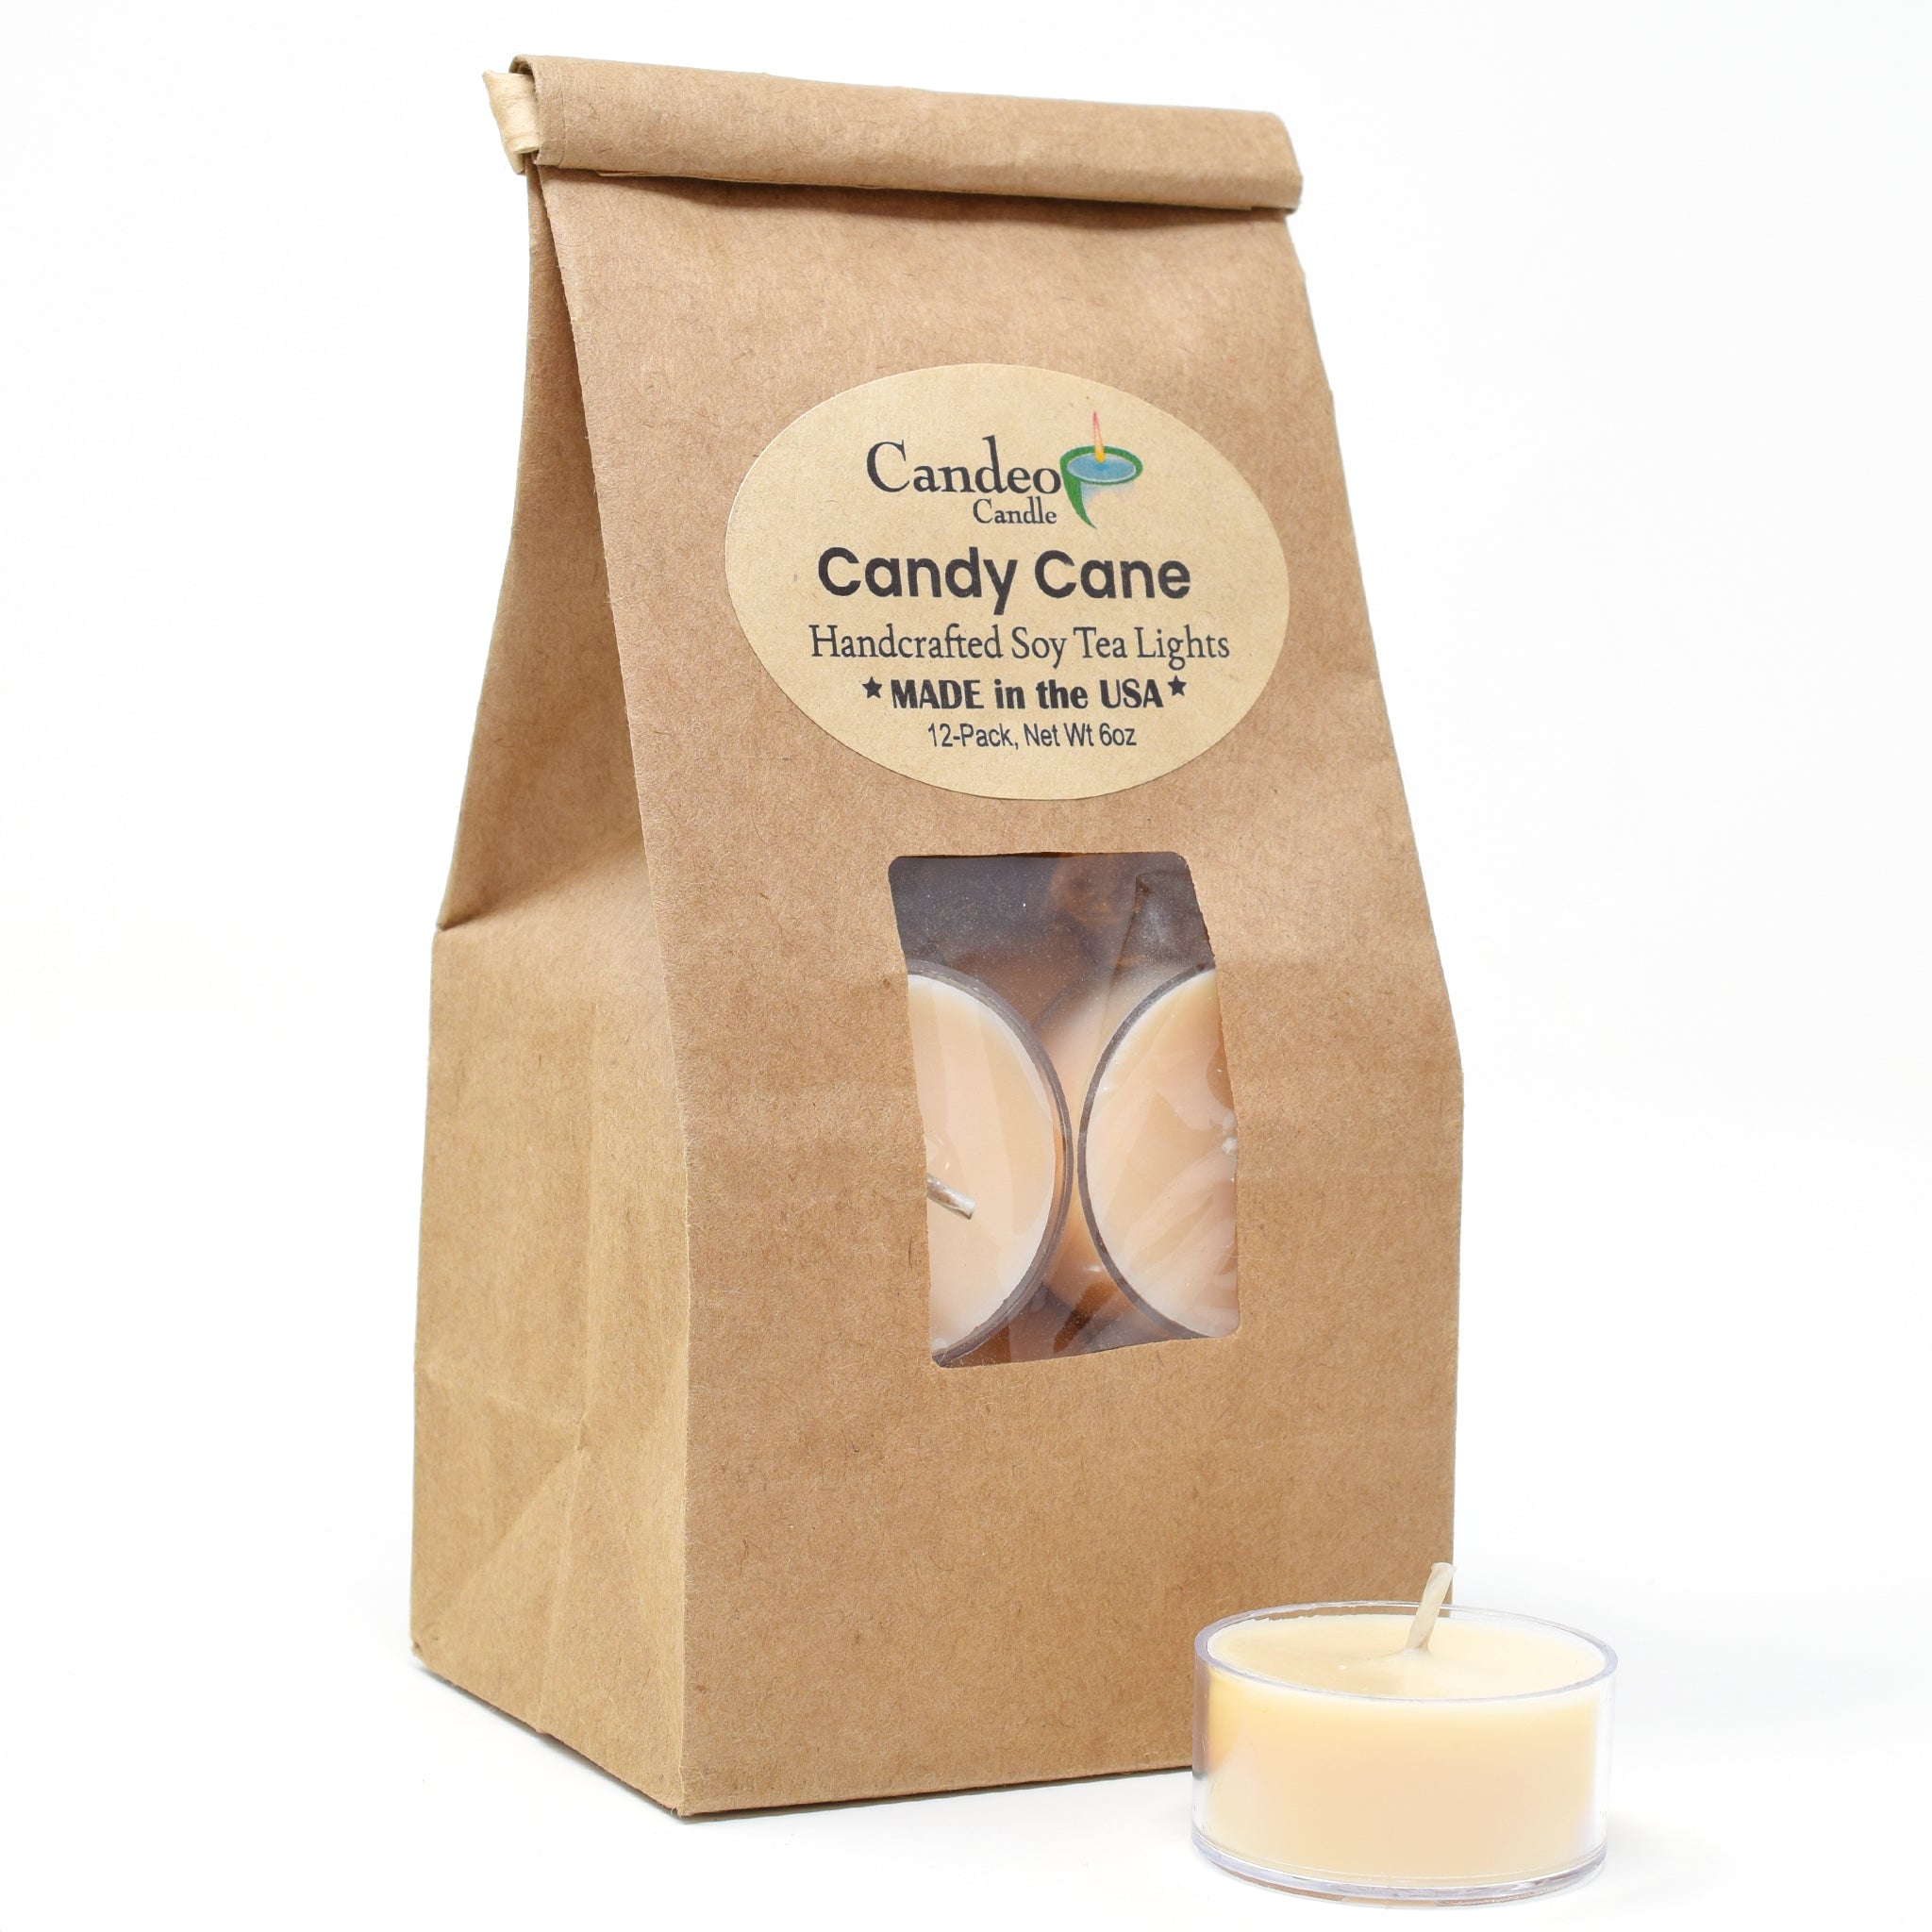 Candy Cane, Soy Tea Light 12-Pack - Candeo Candle